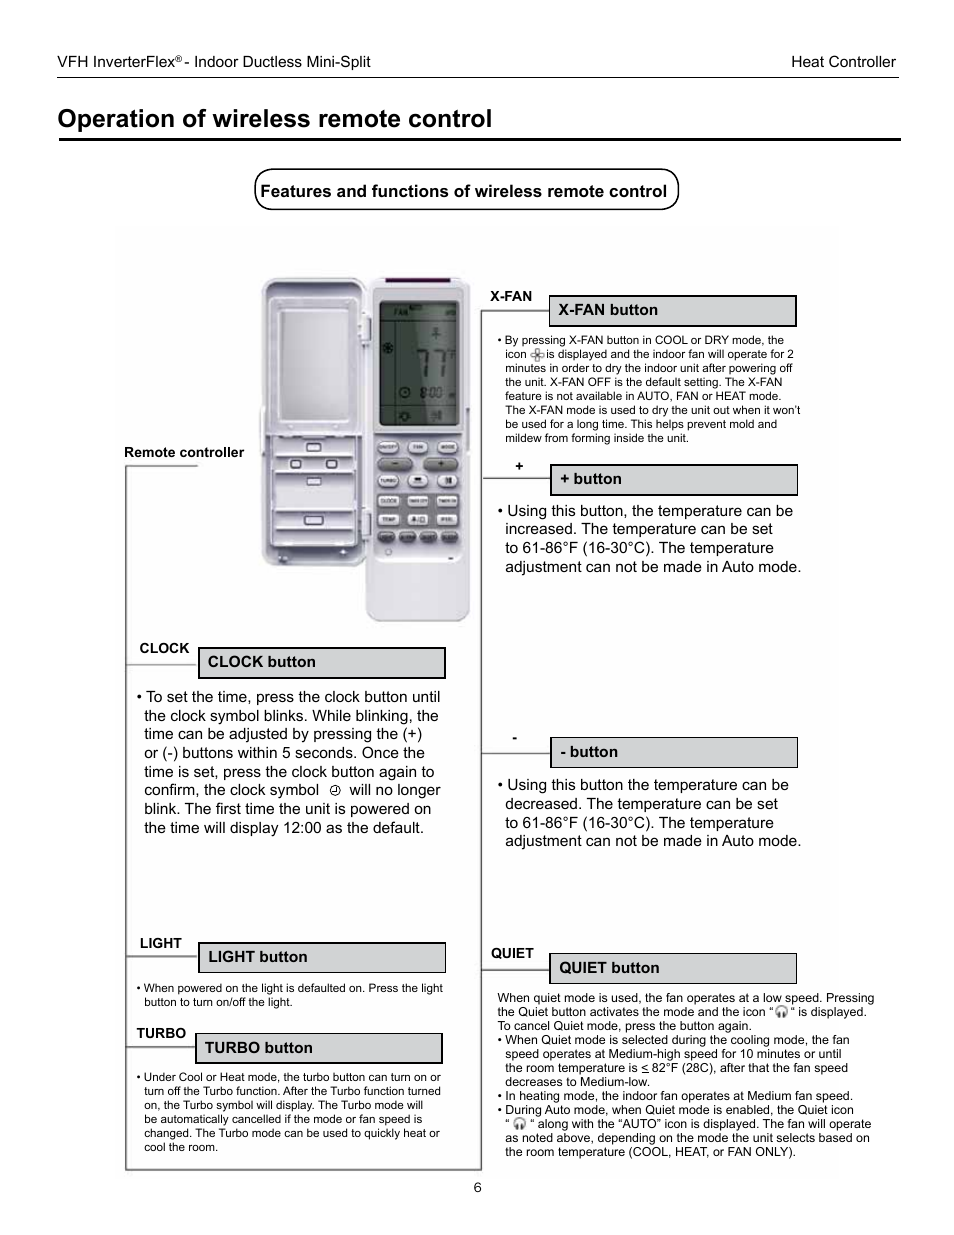 Operation of wireless remote control, Features and functions of